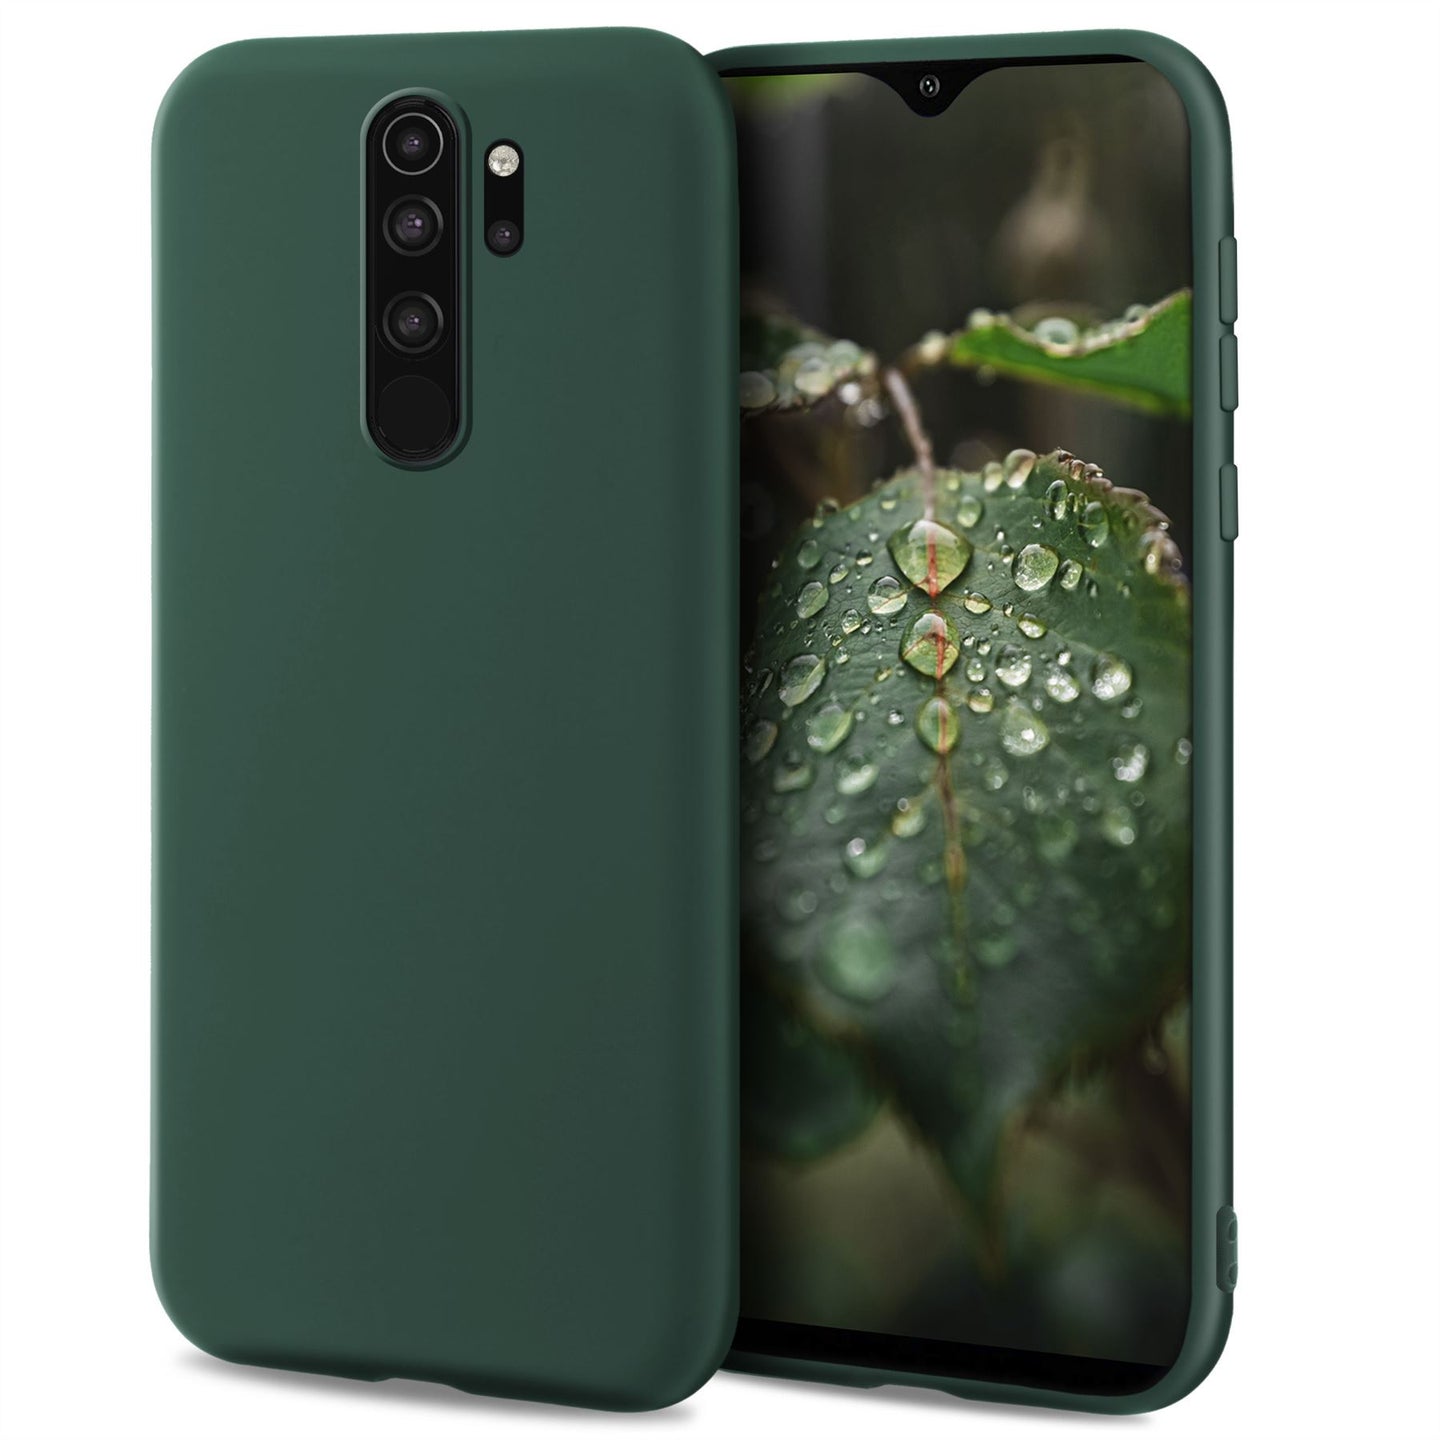 Moozy Lifestyle. Designed for Xiaomi Redmi Note 8 Pro Case, Dark Green - Liquid Silicone Cover with Matte Finish and Soft Microfiber Lining